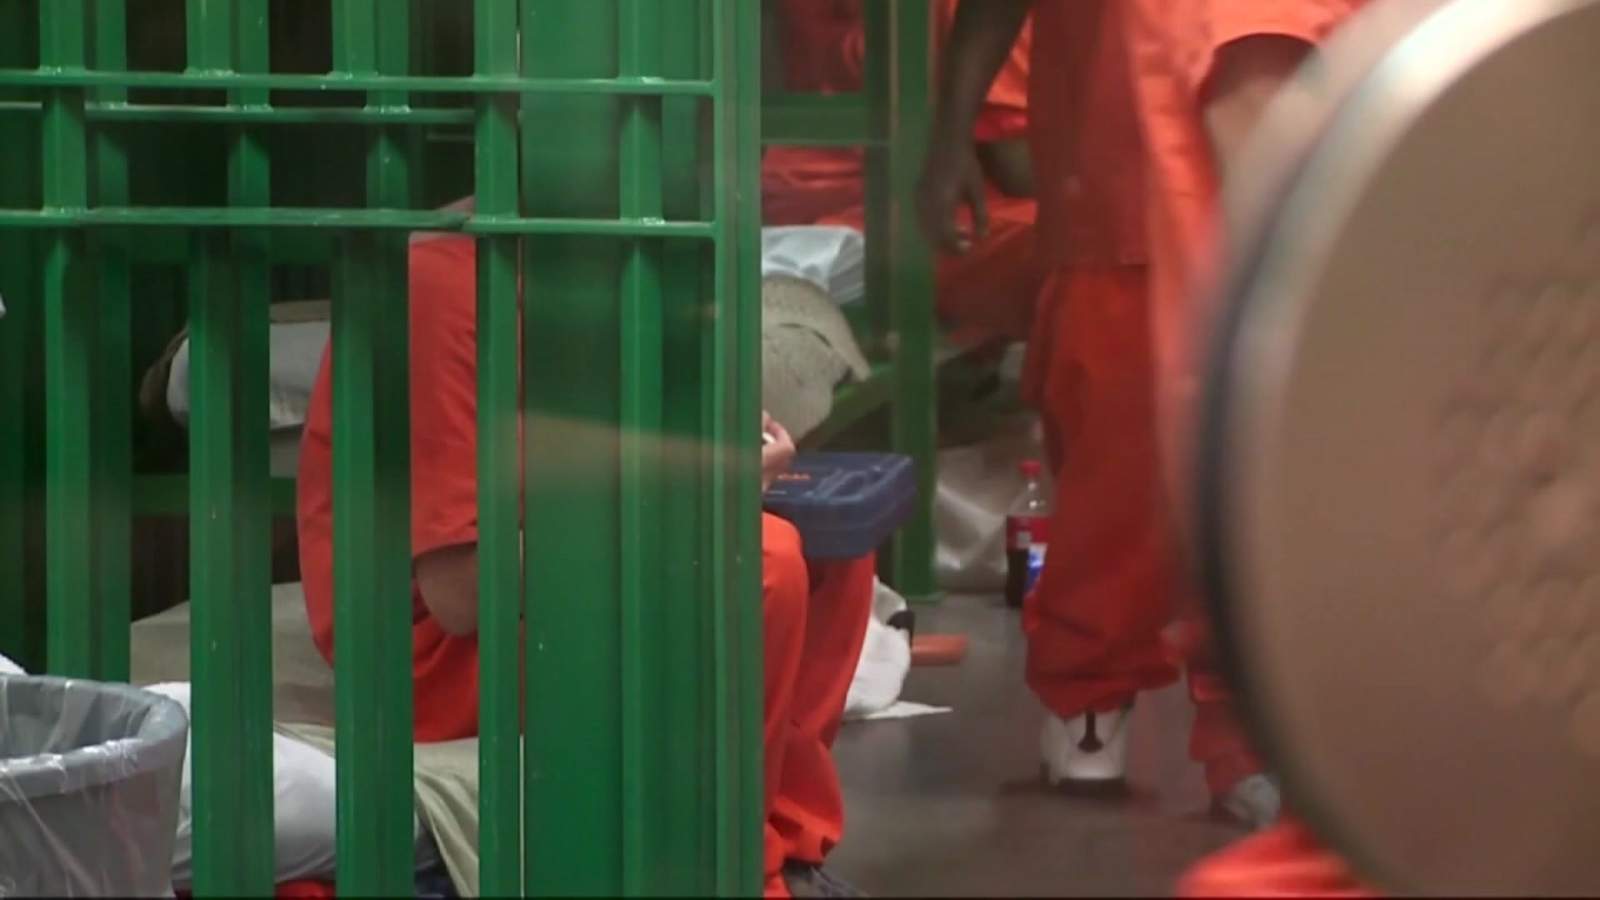 Harris County moves forward with plan to release certain inmates from jail